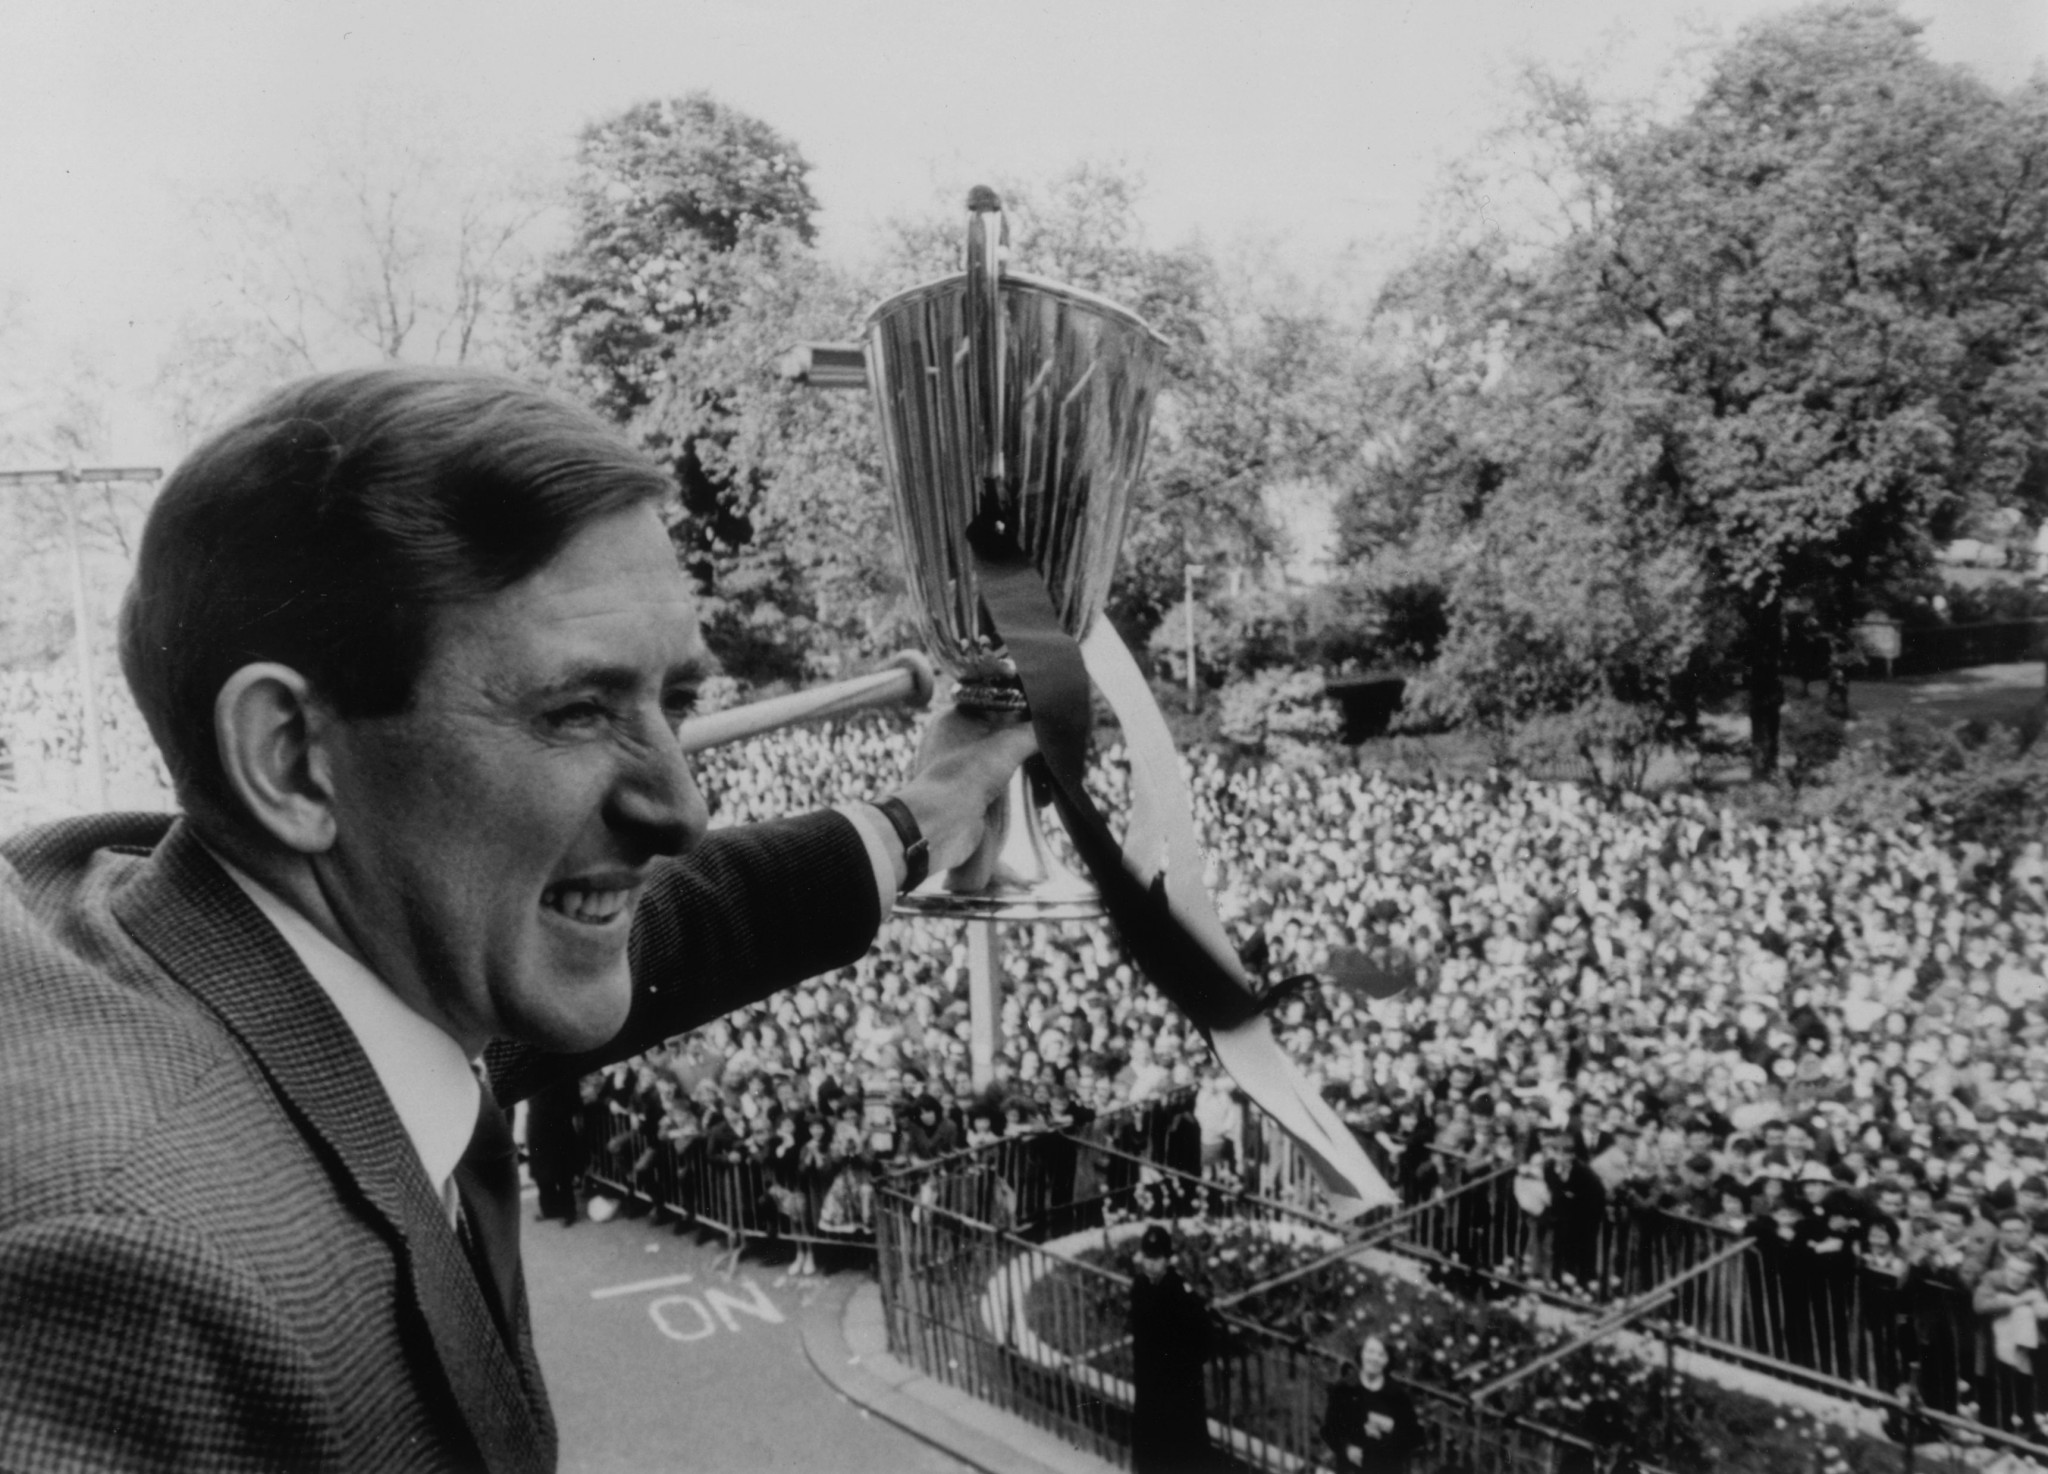 Nearly 150,000 are said to have welcomed Spurs home with the trophy in 1963 ©Getty Images